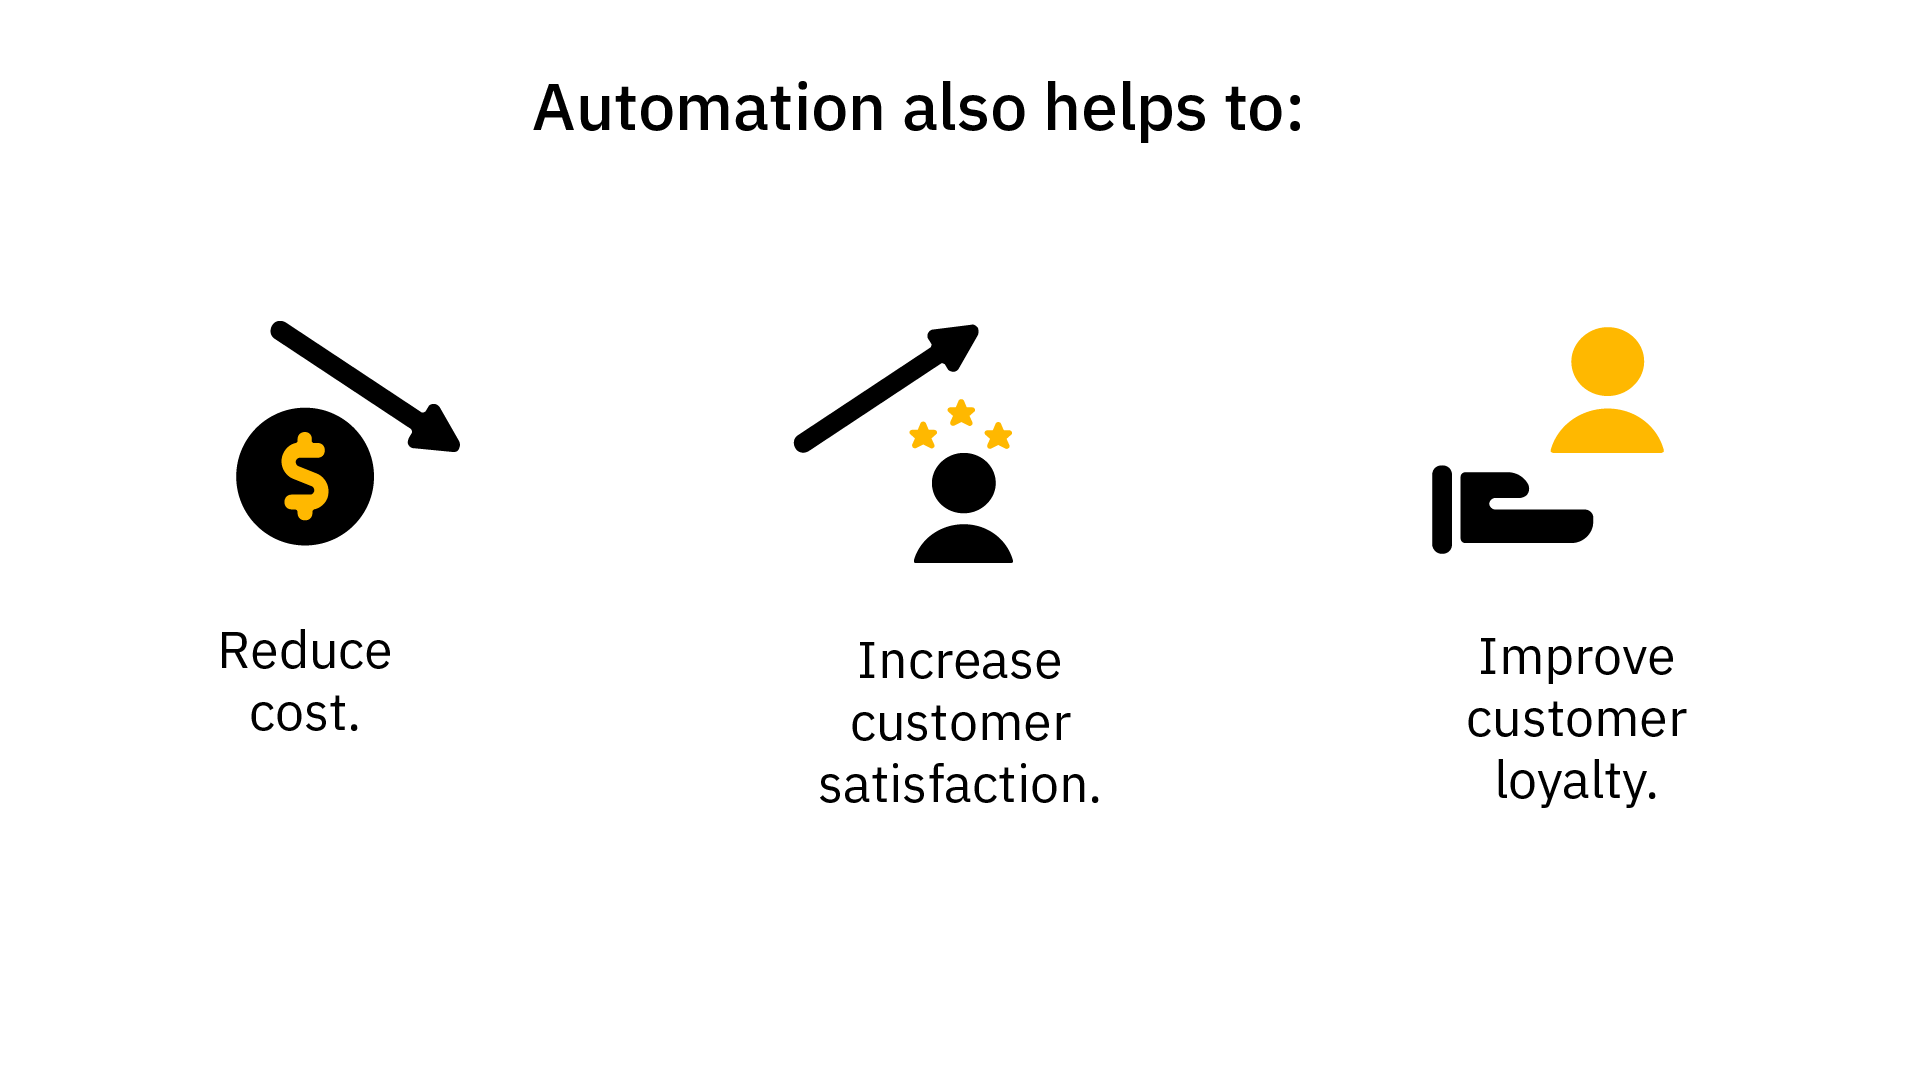 What automation can help with